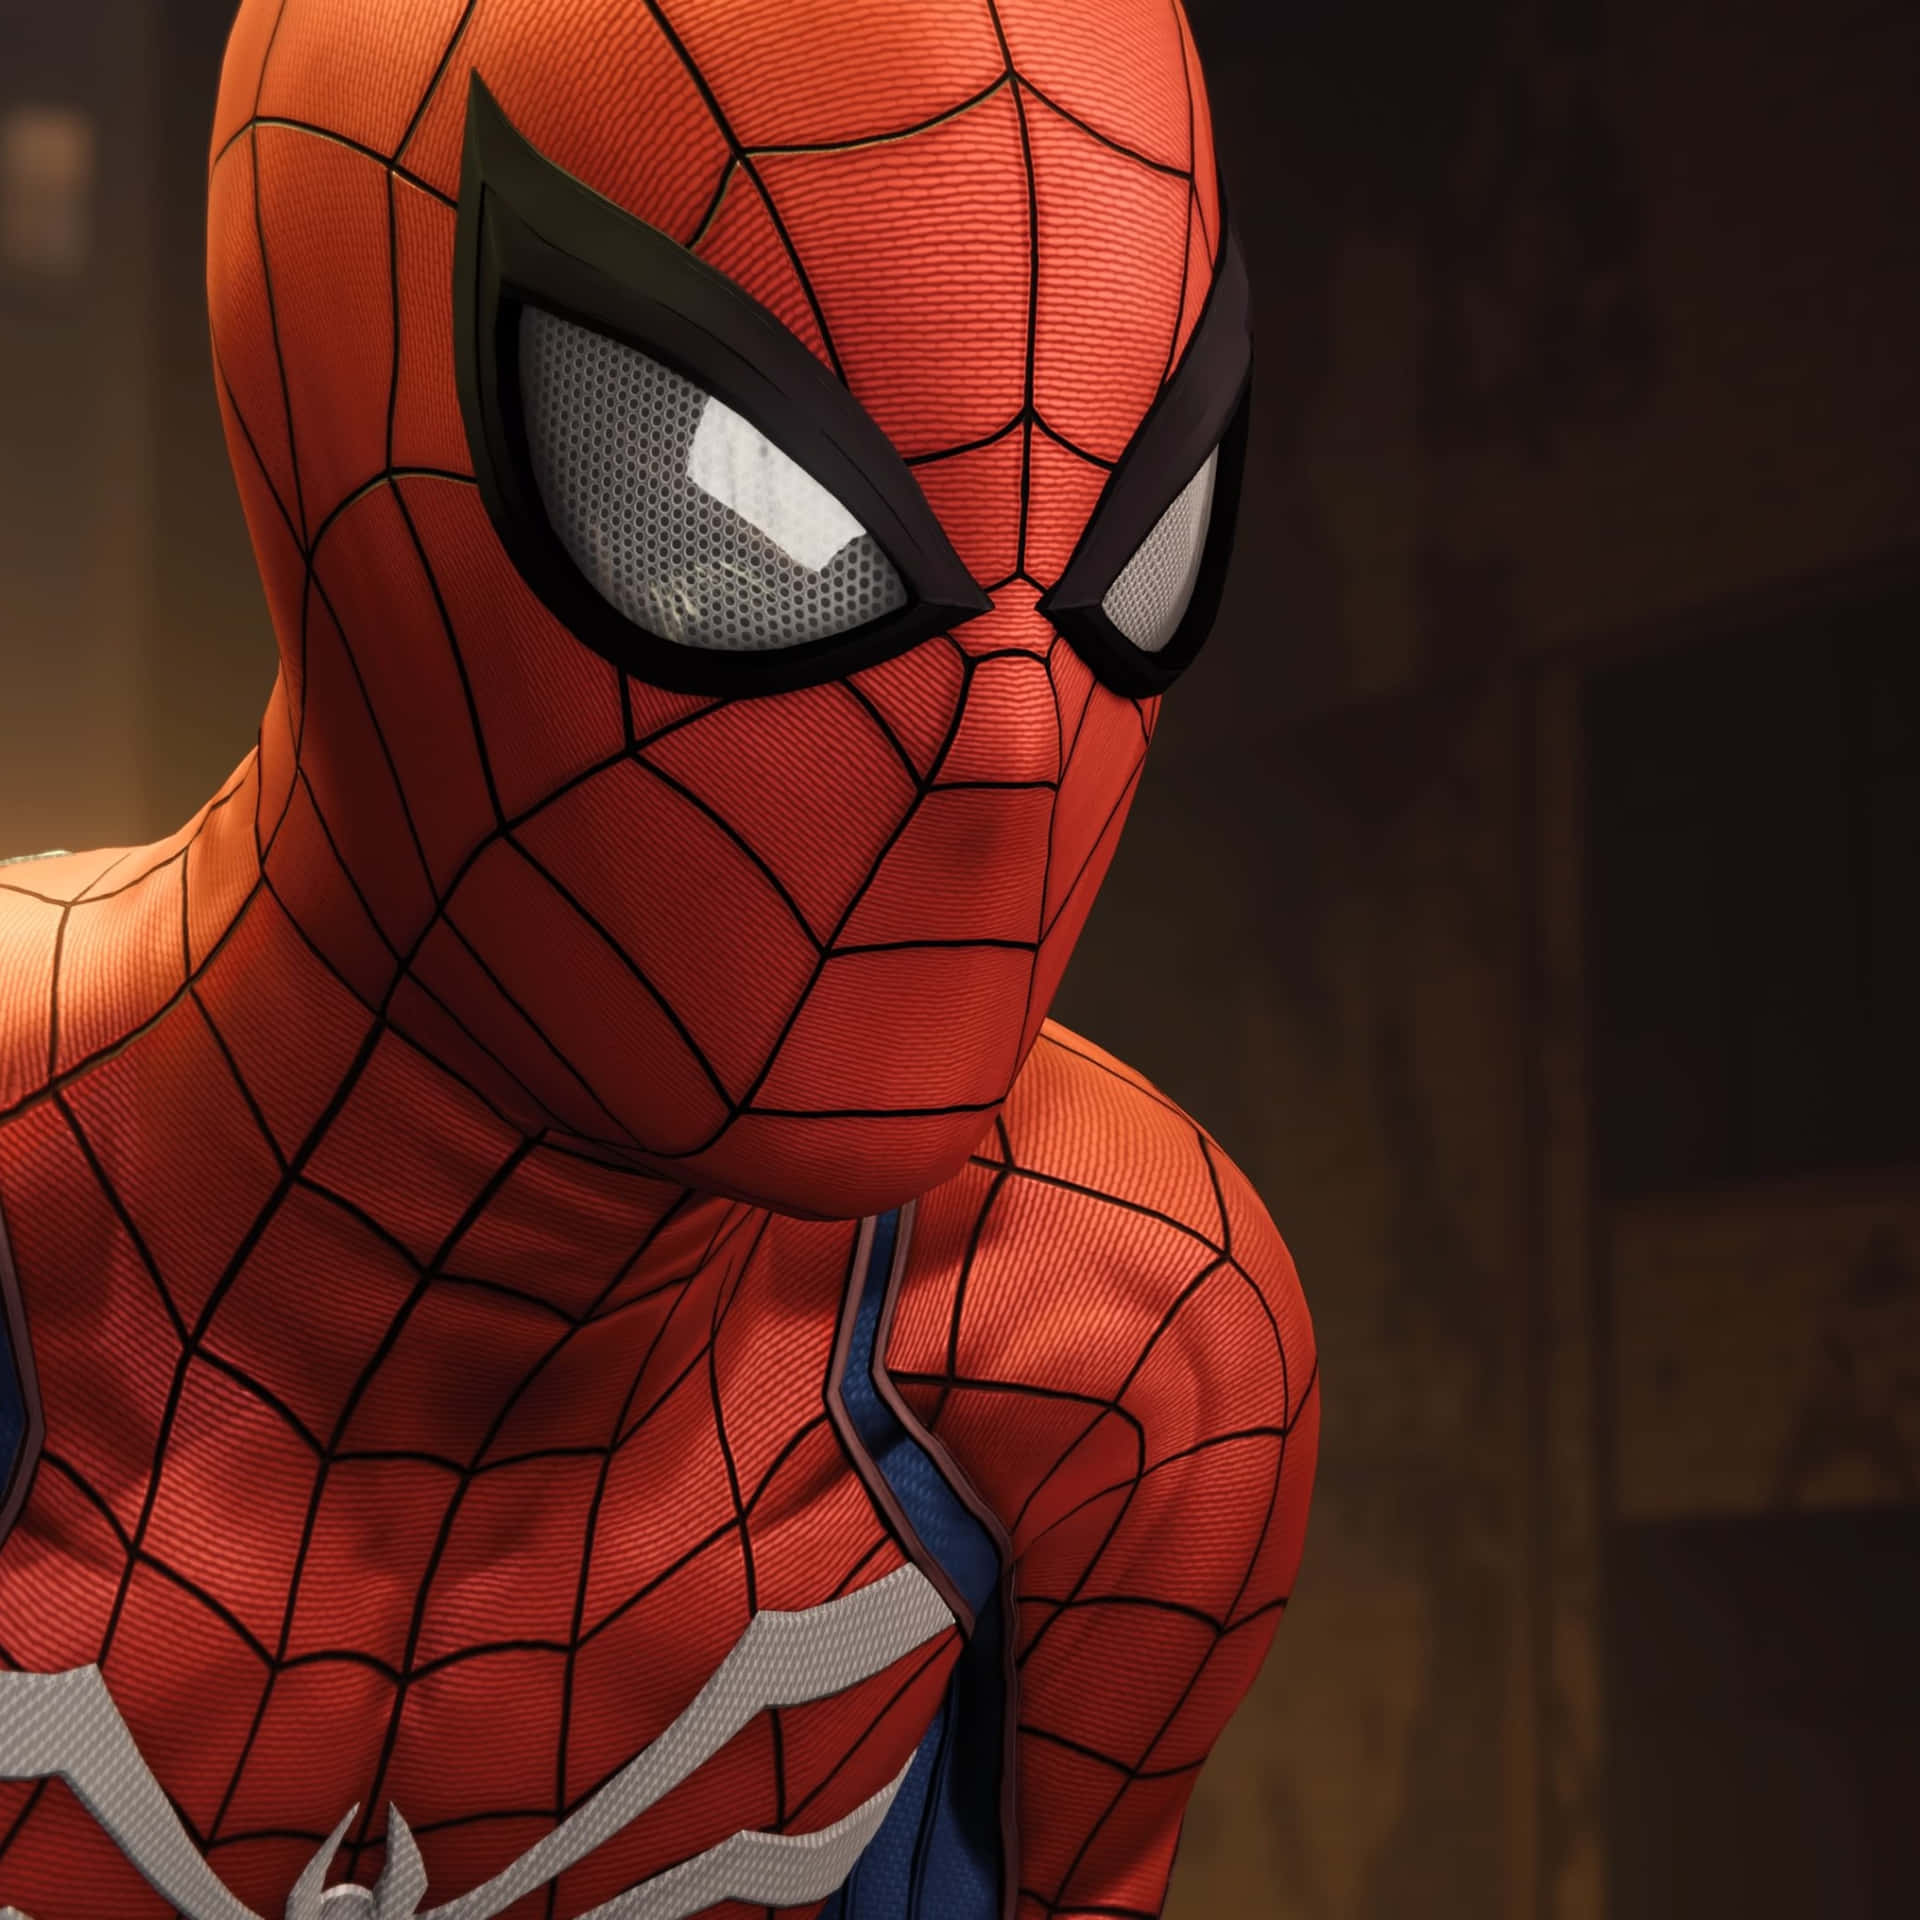 Ps4 Profile Animated Spider-man Close-up Picture